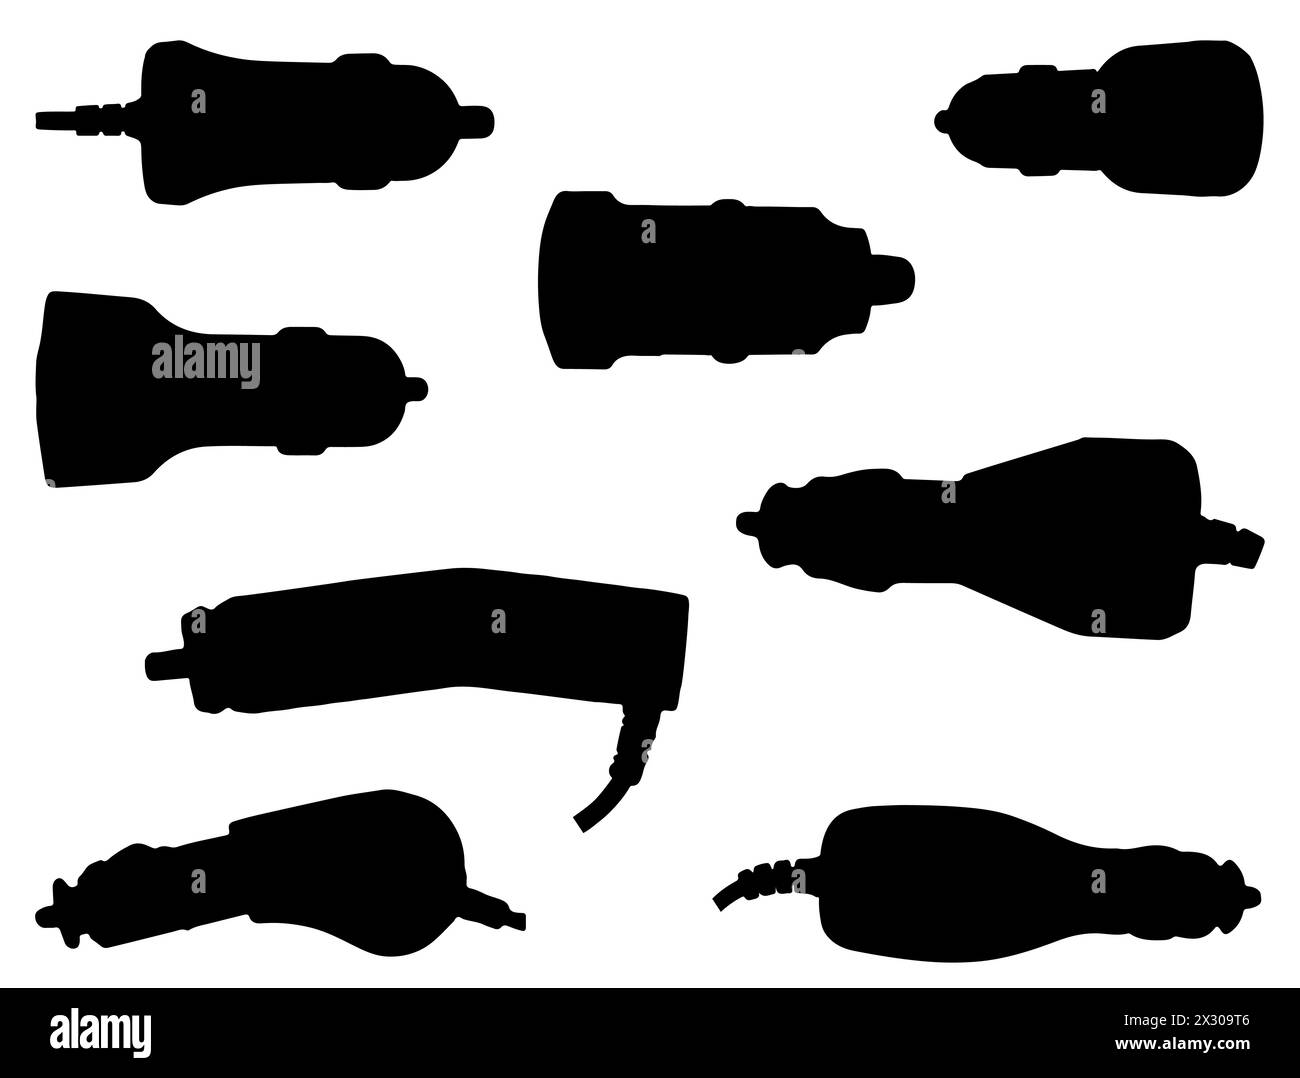 Car chargers silhouette vector art Stock Vector